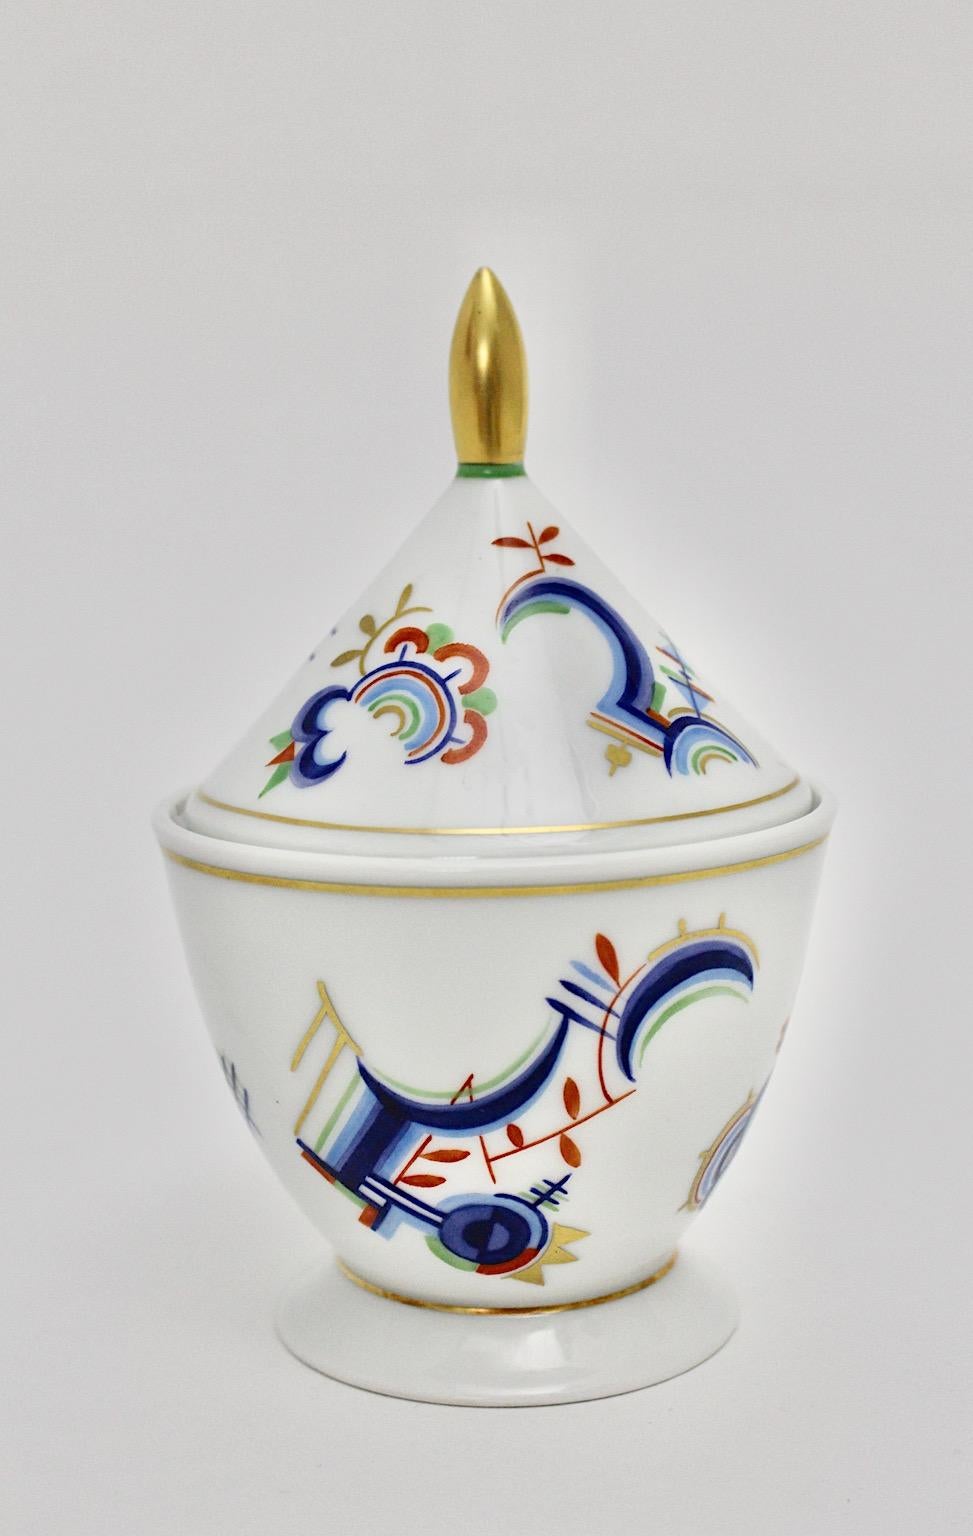 Art Deco Vintage multicolored porcelain lid box by Rosenthal Selb Bavaria Schwalb circa 1939 Germany.
A graceful hand painted Art Deco lid box from porcelain by Rosenthal Selb Bavaria with multicolored Art Deco elements in blue, red and gold